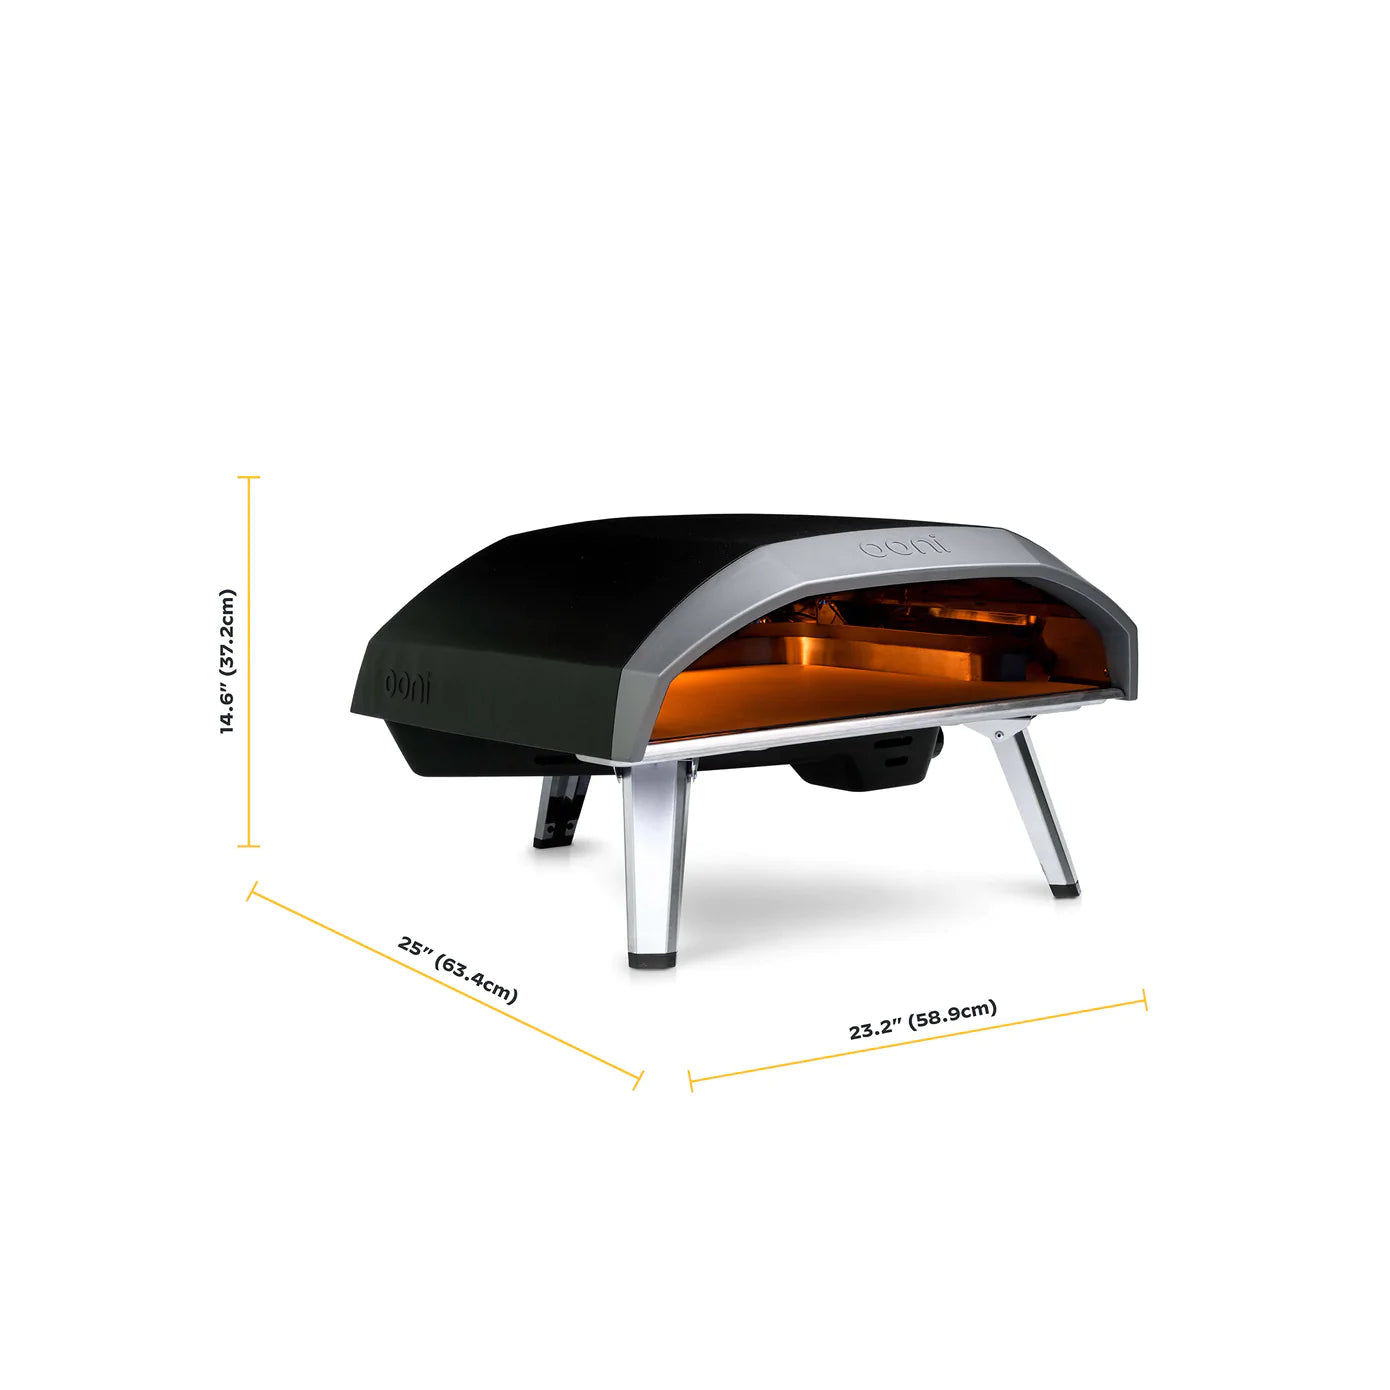 Pizza Oven - Ooni Koda 16 Gas Pizza Oven [FREE SHIPPING]